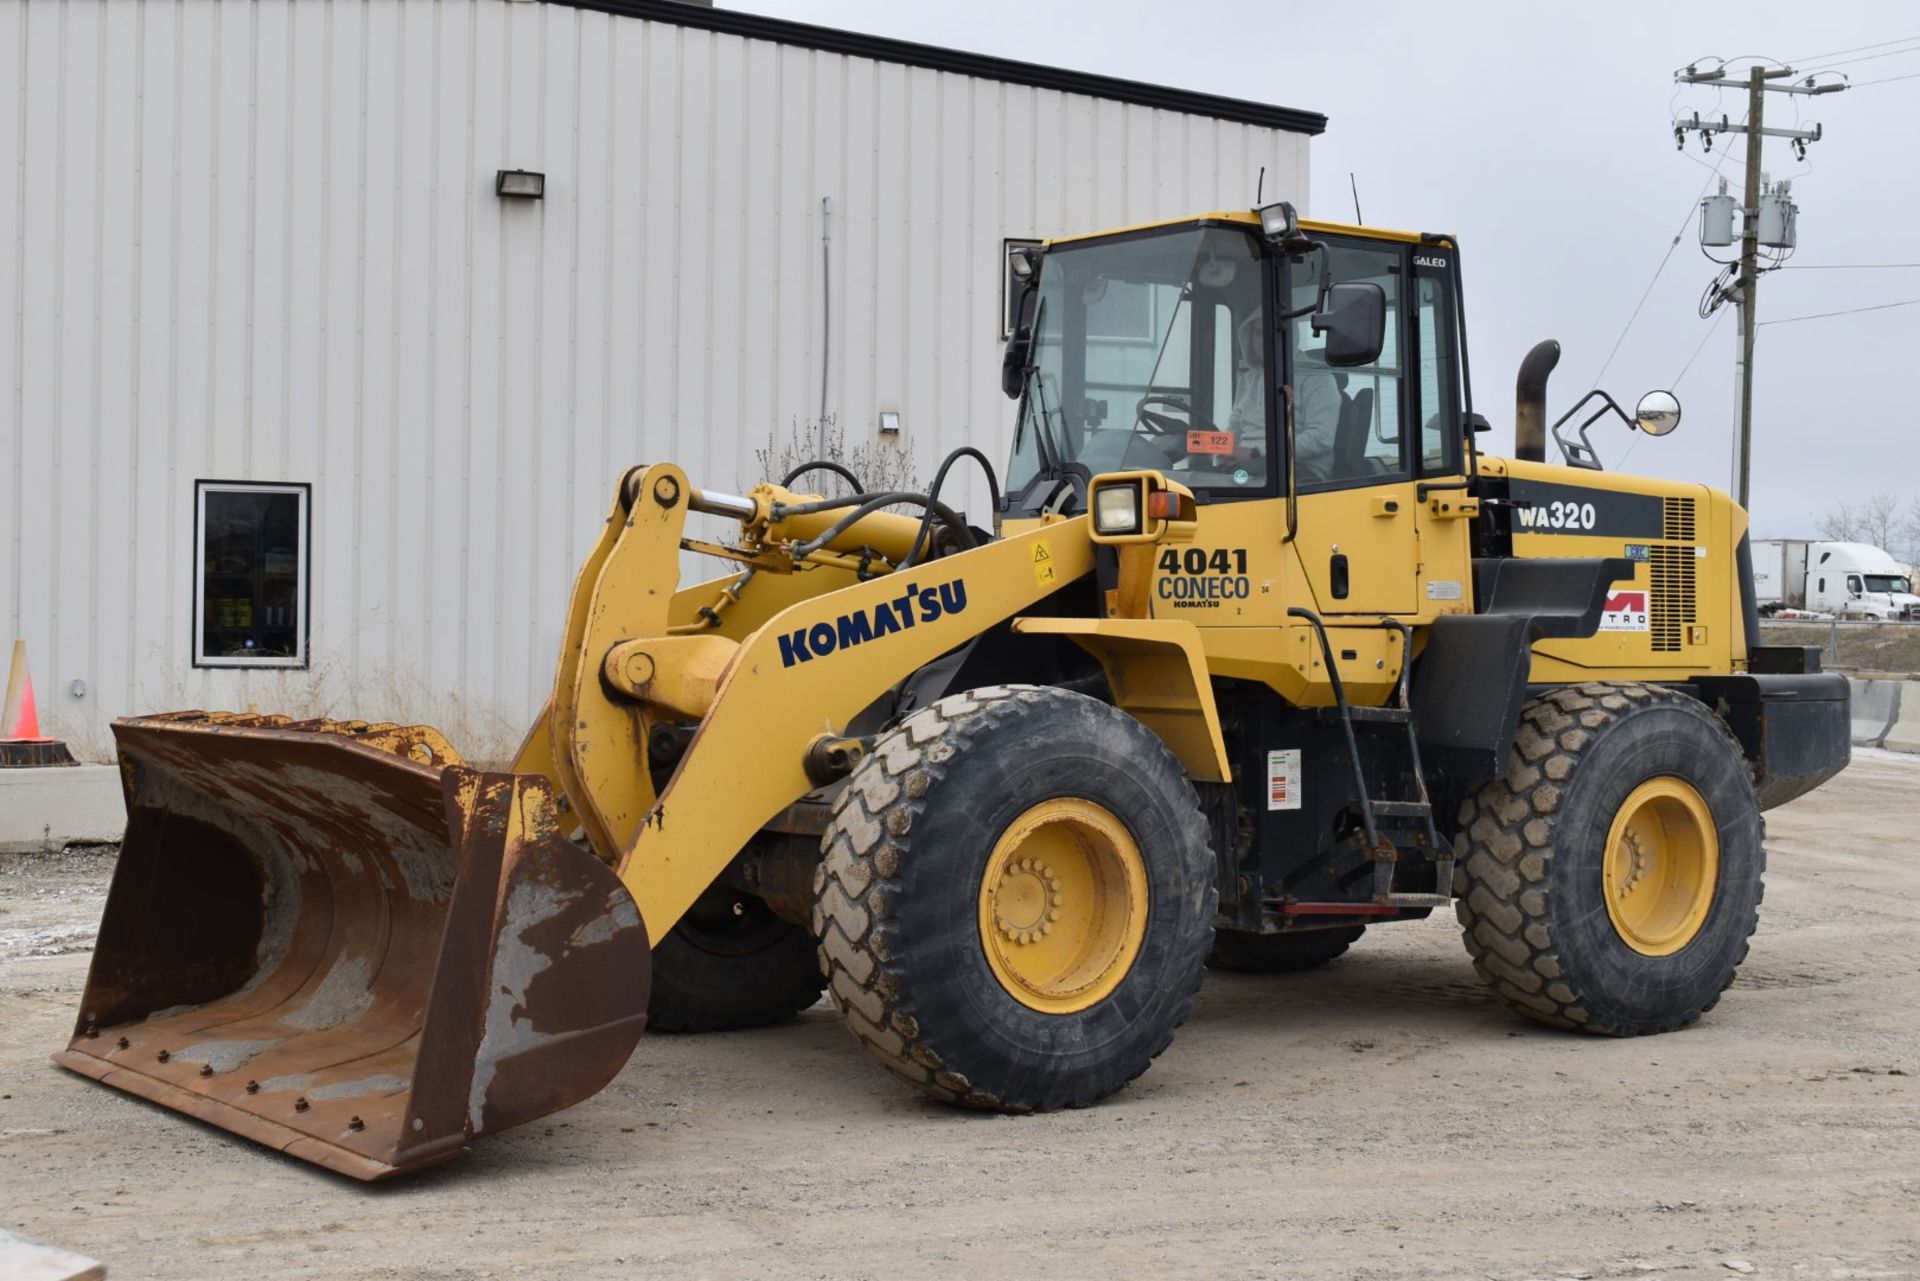 KOMATSU (2008) WA320-6 ARTICULATING FRONT-END WHEEL LOADER WITH BUCKET, APPROX. 7,885 HOURS (